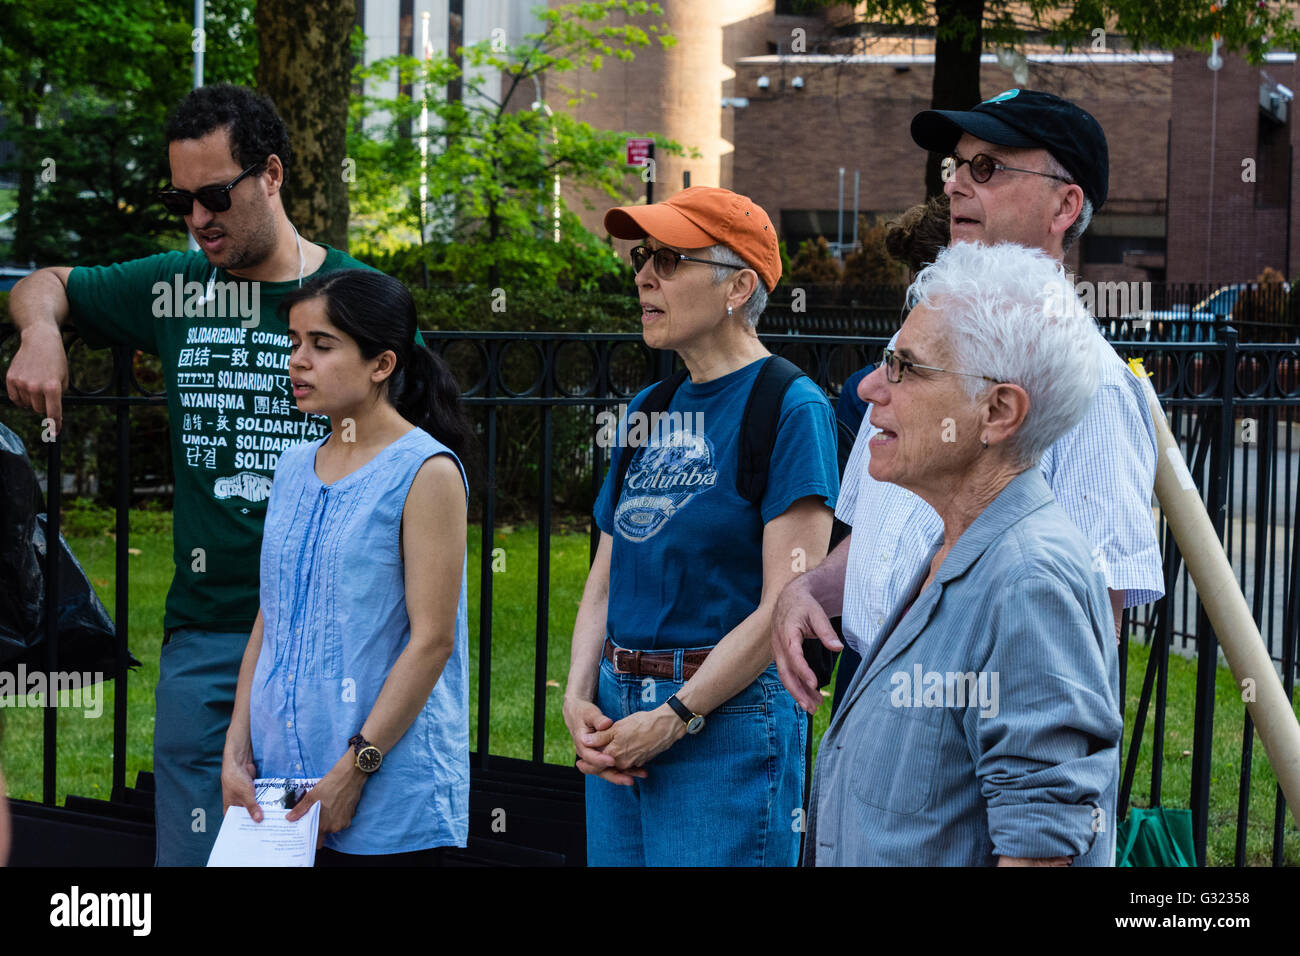 New York, USA. 6th June 2016. Activists sing to inmates accused of terrorism in NYC jail during vigil. Prison rights advocates of the No Separate Justice campaign held a vigil at New York's Metropolitan Correctional Center charging human rights violations and abusive treatment of terror suspects held in such facilities. Credit:  M. Stan Reaves/Alamy Live News Stock Photo